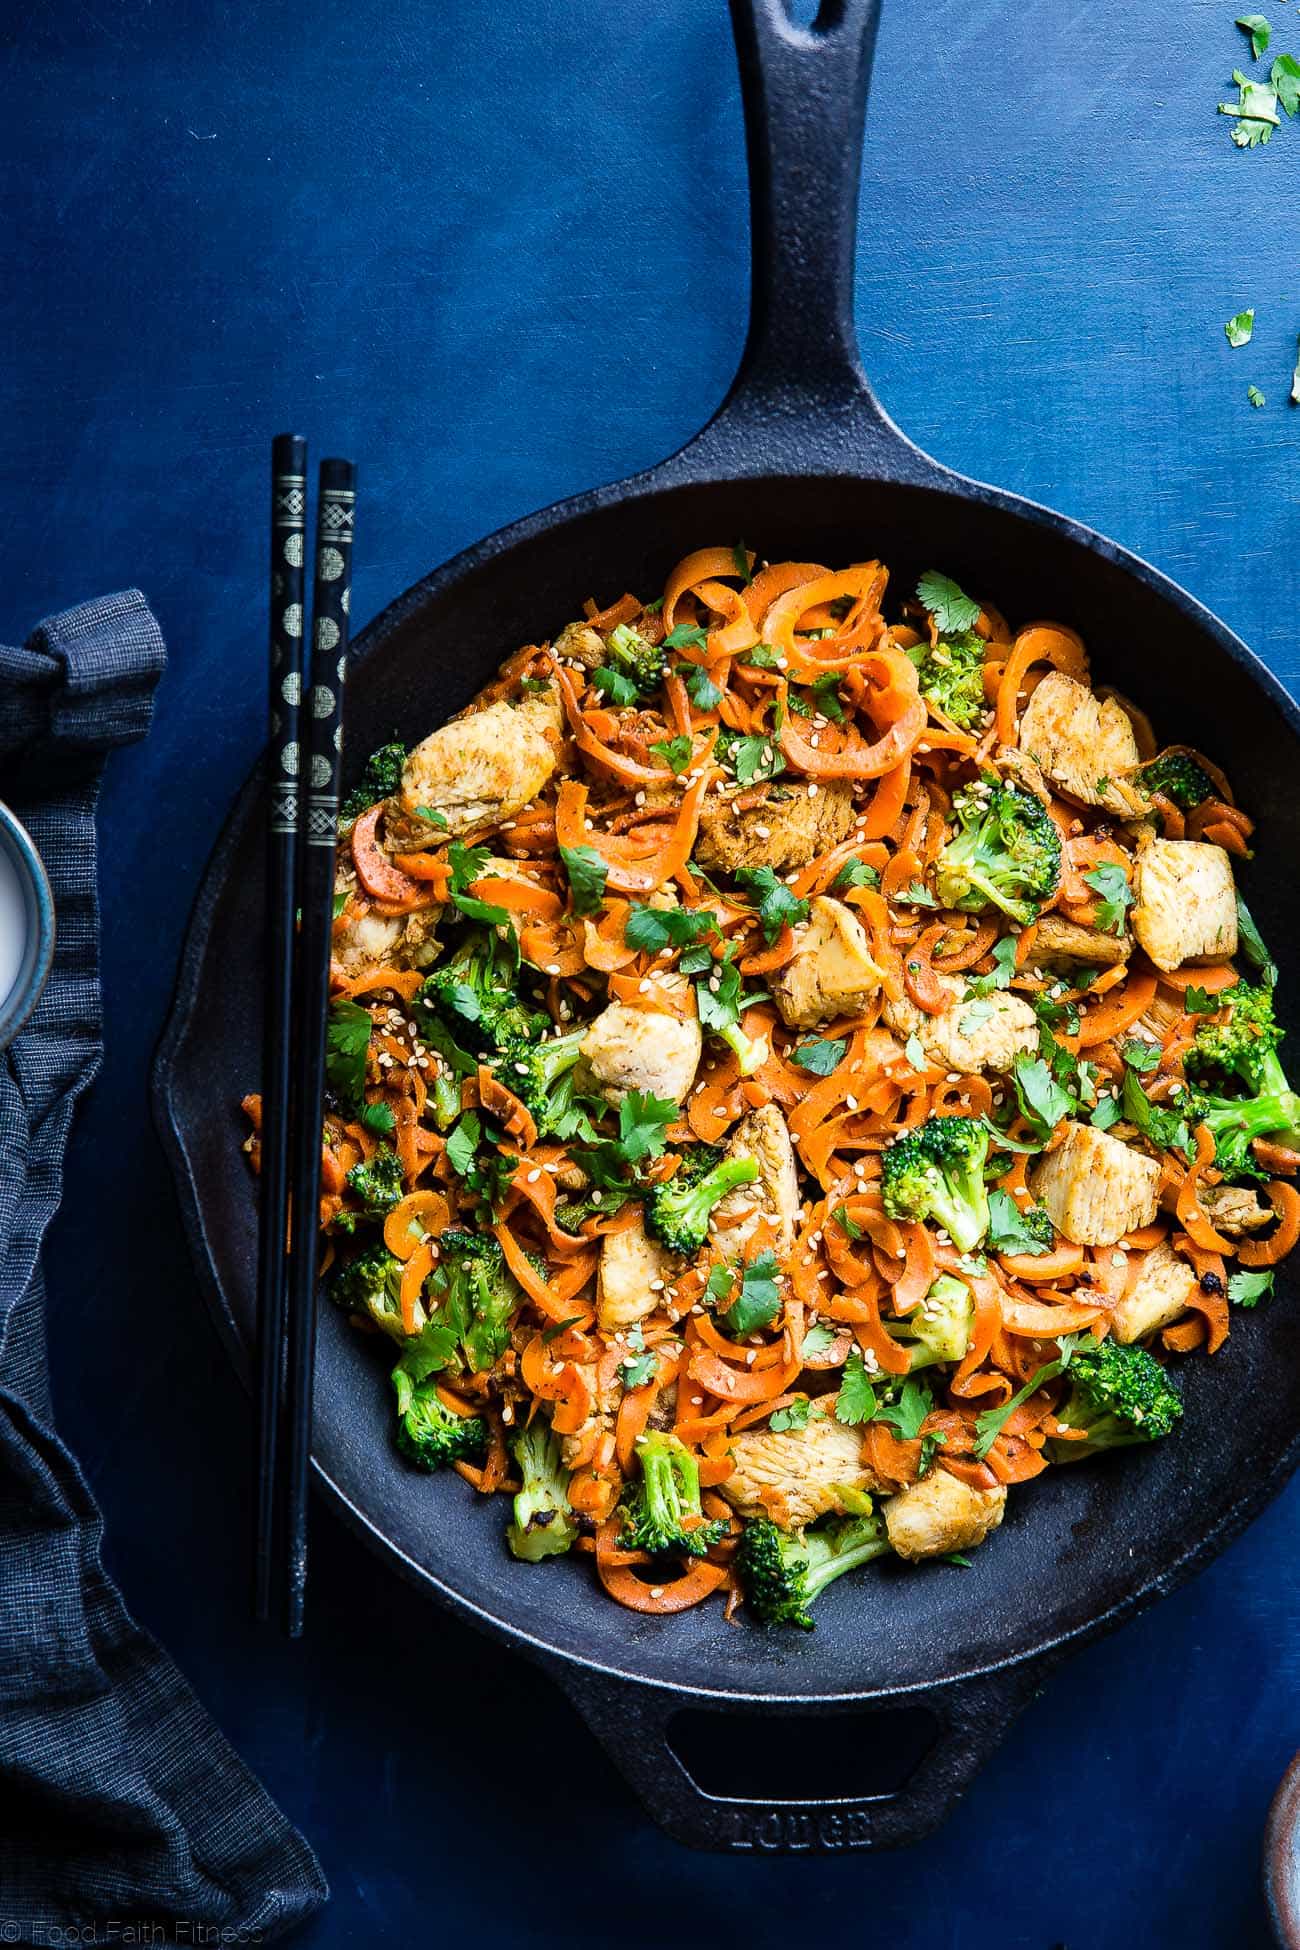 Whole30 Chicken Stir Fry with Cumin Coconut Carrot Noodles - This gluten free, low carb chicken stir fry has creamy coconut, coriander and cardamom! Add broccoli and carrot noodles for a quick and easy, paleo weeknight dinner! | Foodfaithfitness.com | @FoodFaithFit